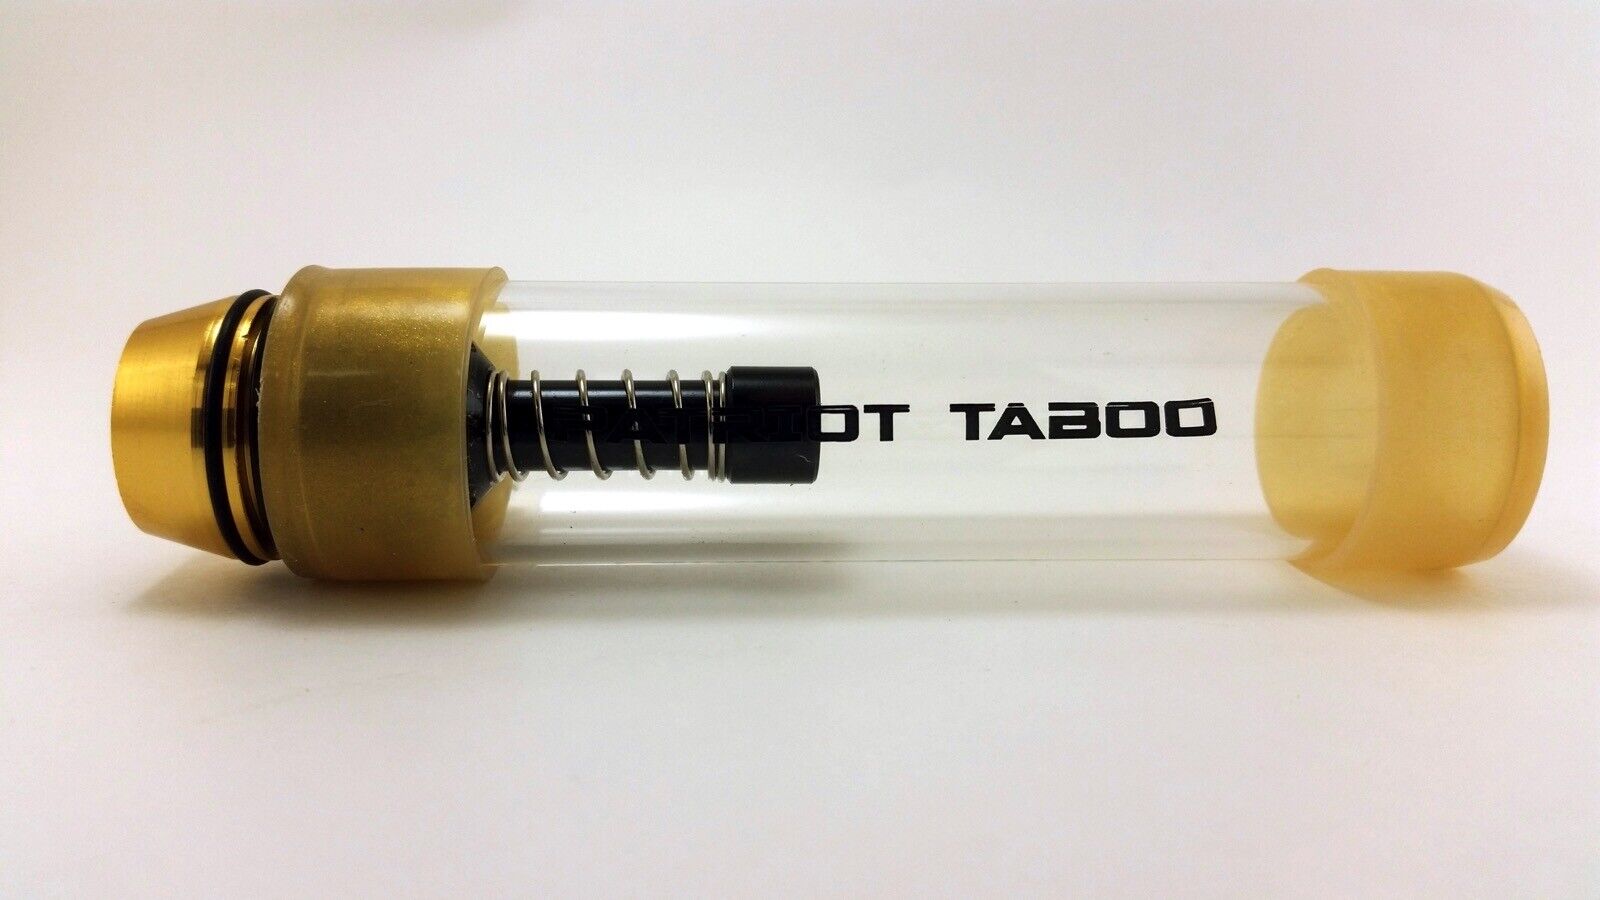 SUMMER SALE Patriot Taboo: Smoke-It BASIC - GOLD (Compare to Incredibowl)